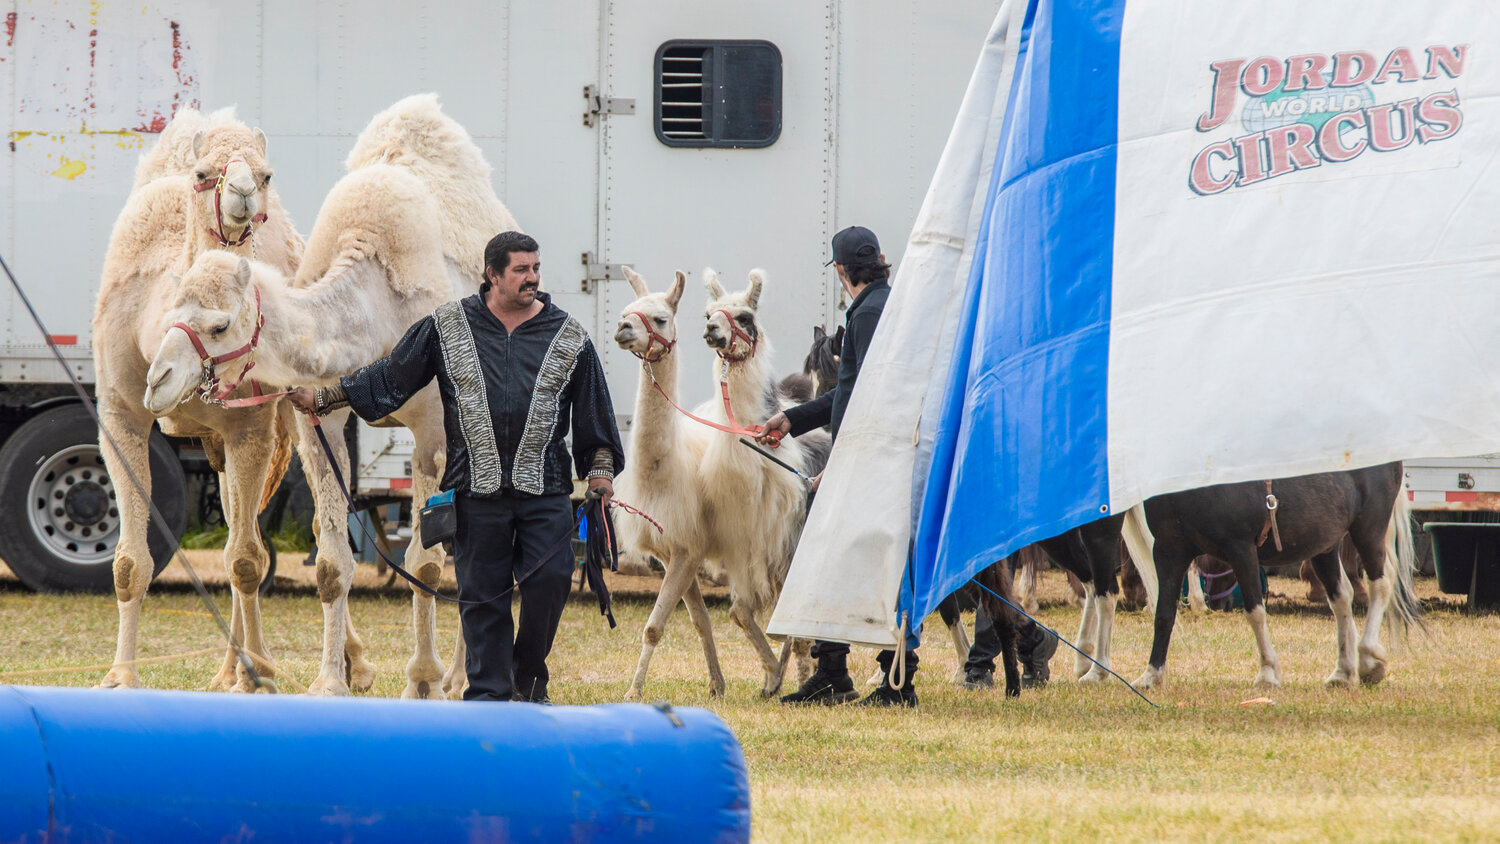 Camels, llamas and miniature horses are introduced to the crowd at the Southwest Washington Fairgrounds during the Jordan World Circus show on Wednesday, May 31.